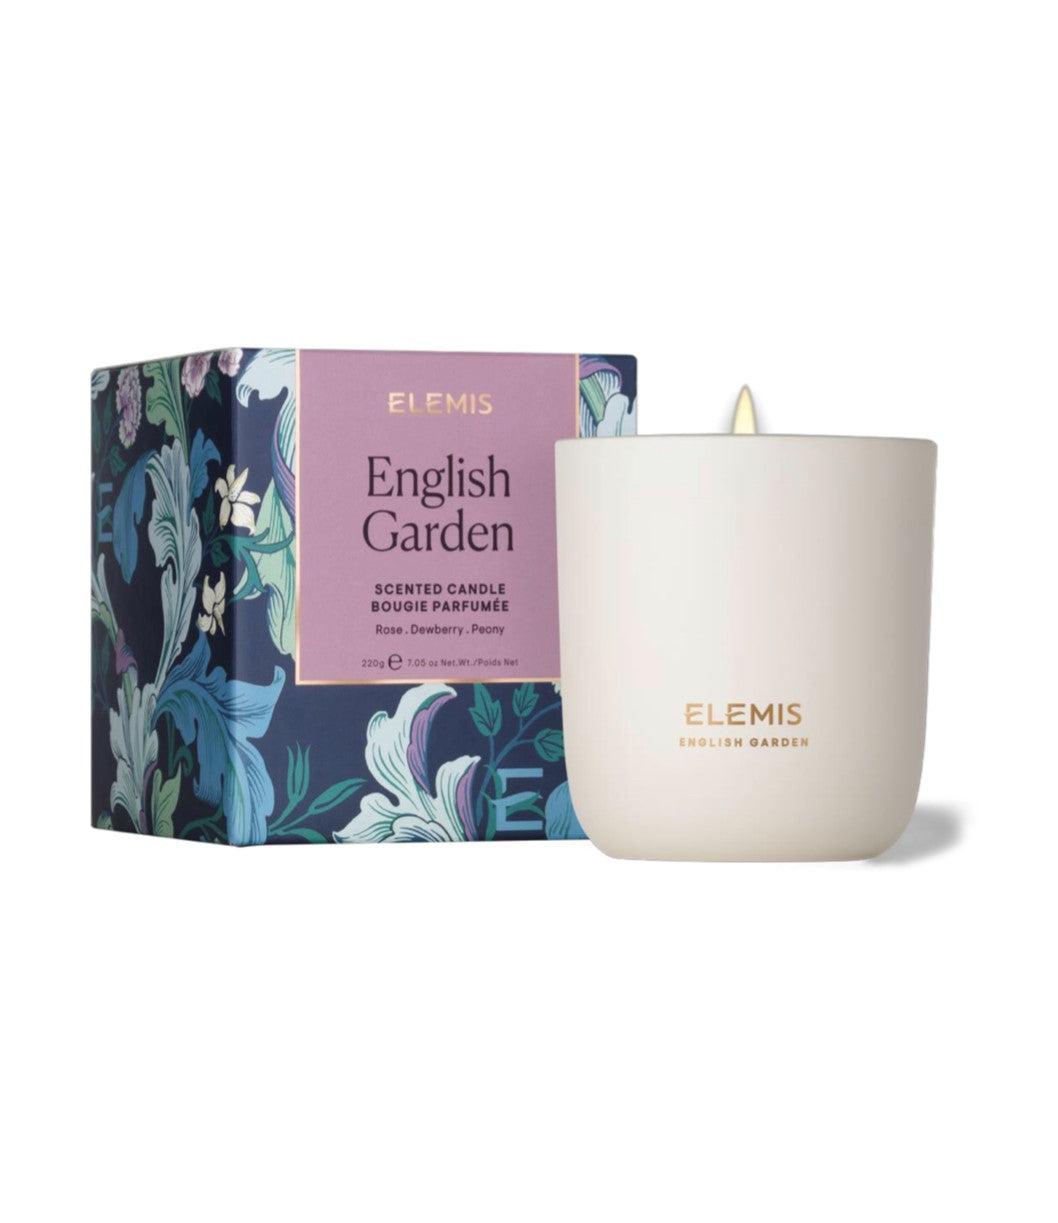 ELEMIS English Garden Scented Candle